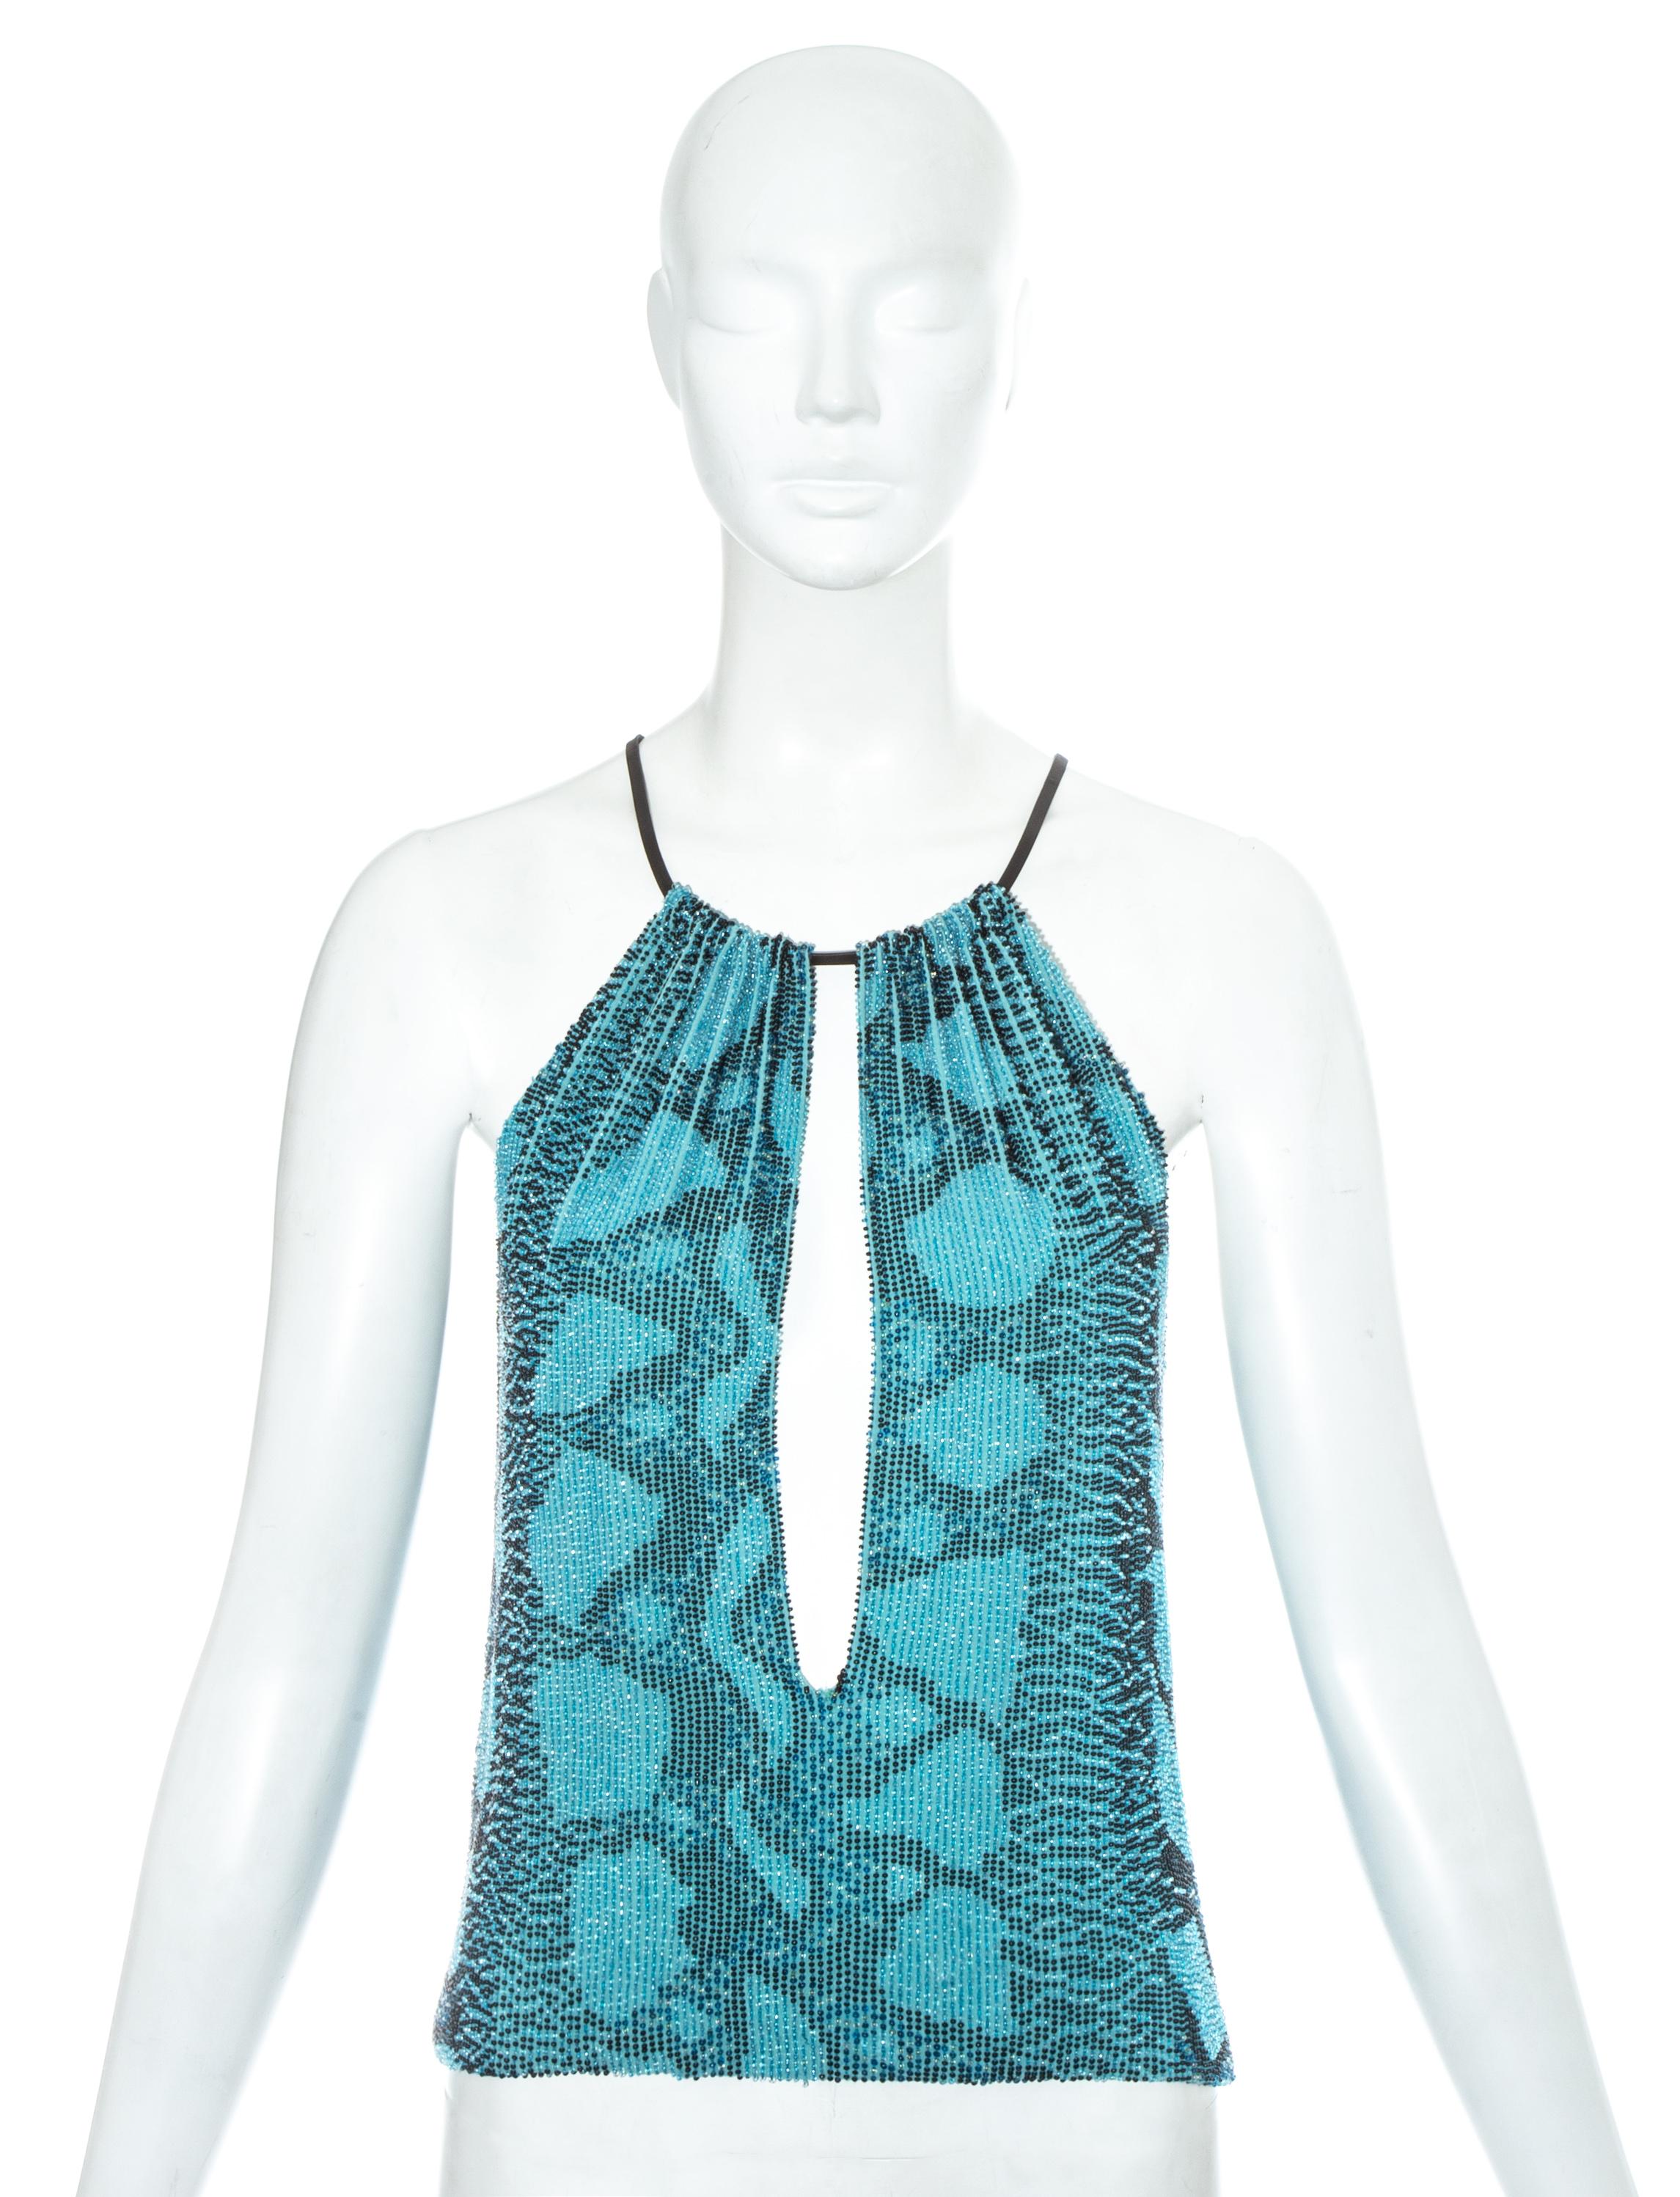 Gucci by Tom Ford blue beaded snake print evening top, ss 2000 at ...